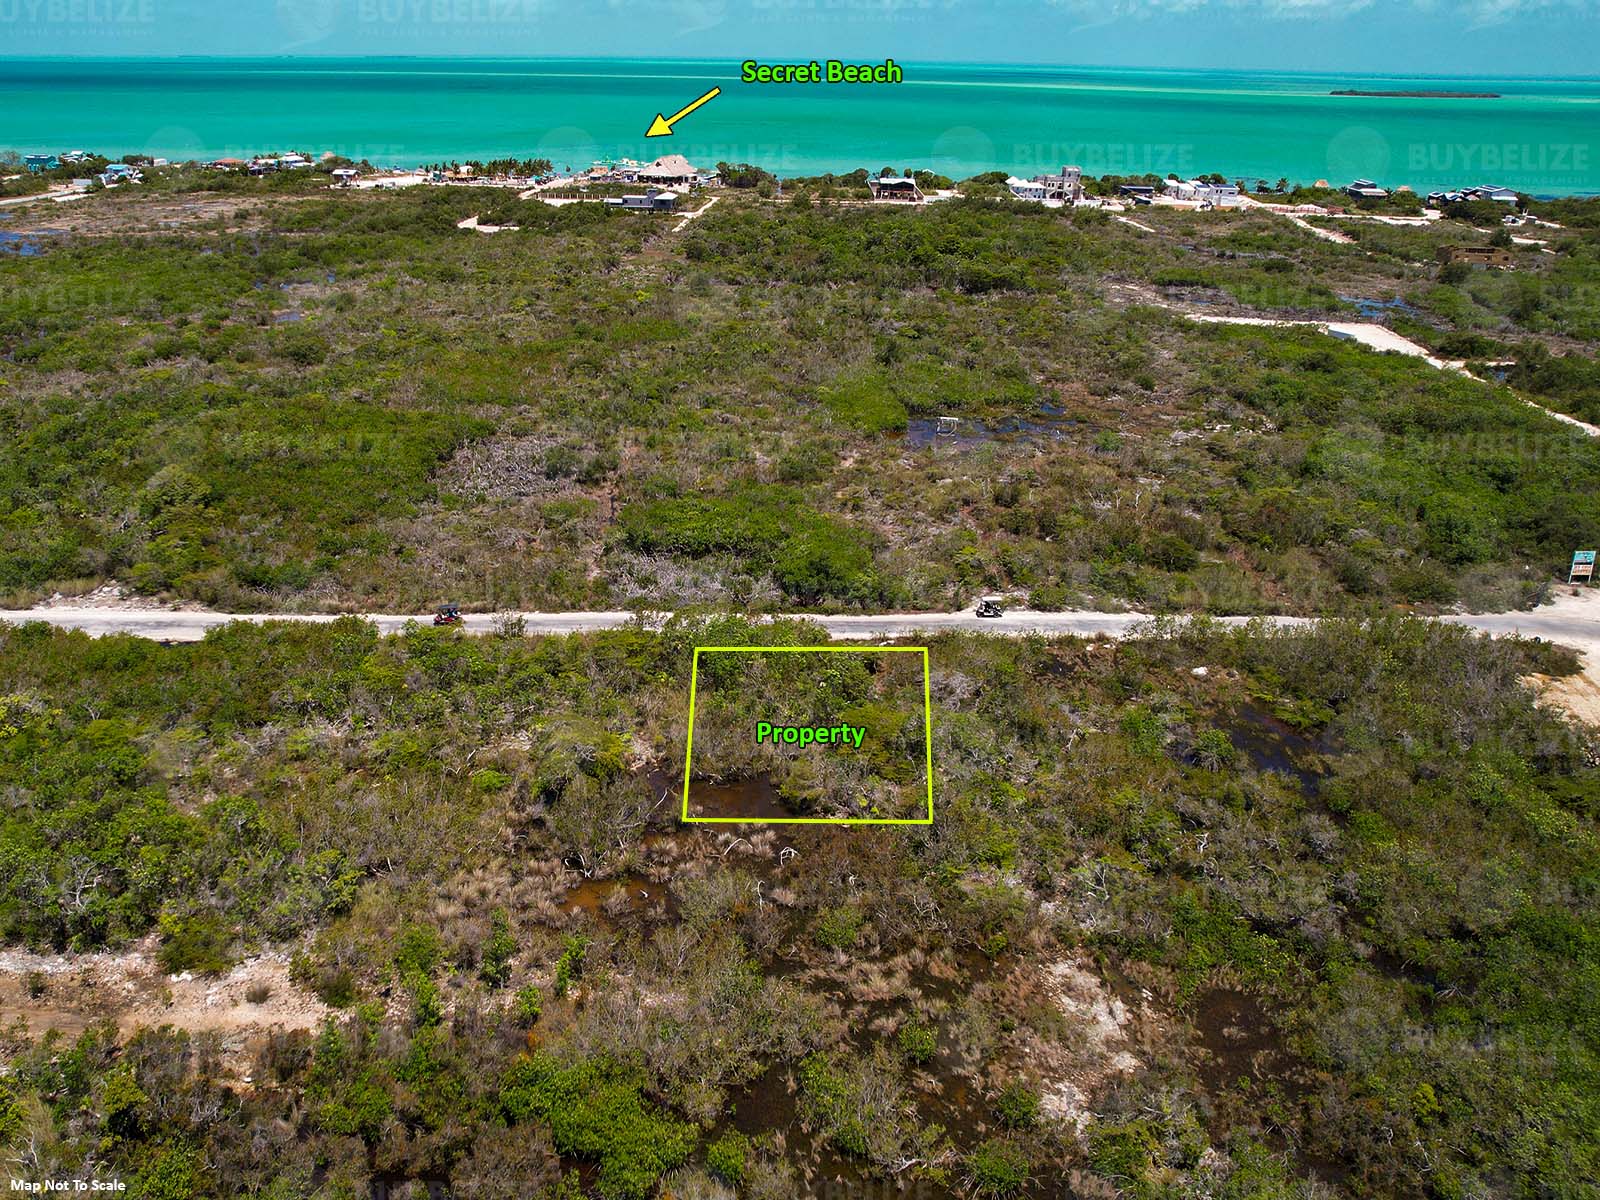 Prime Lot For Sale Located Minutes Away From Secret Beach, San Pedro